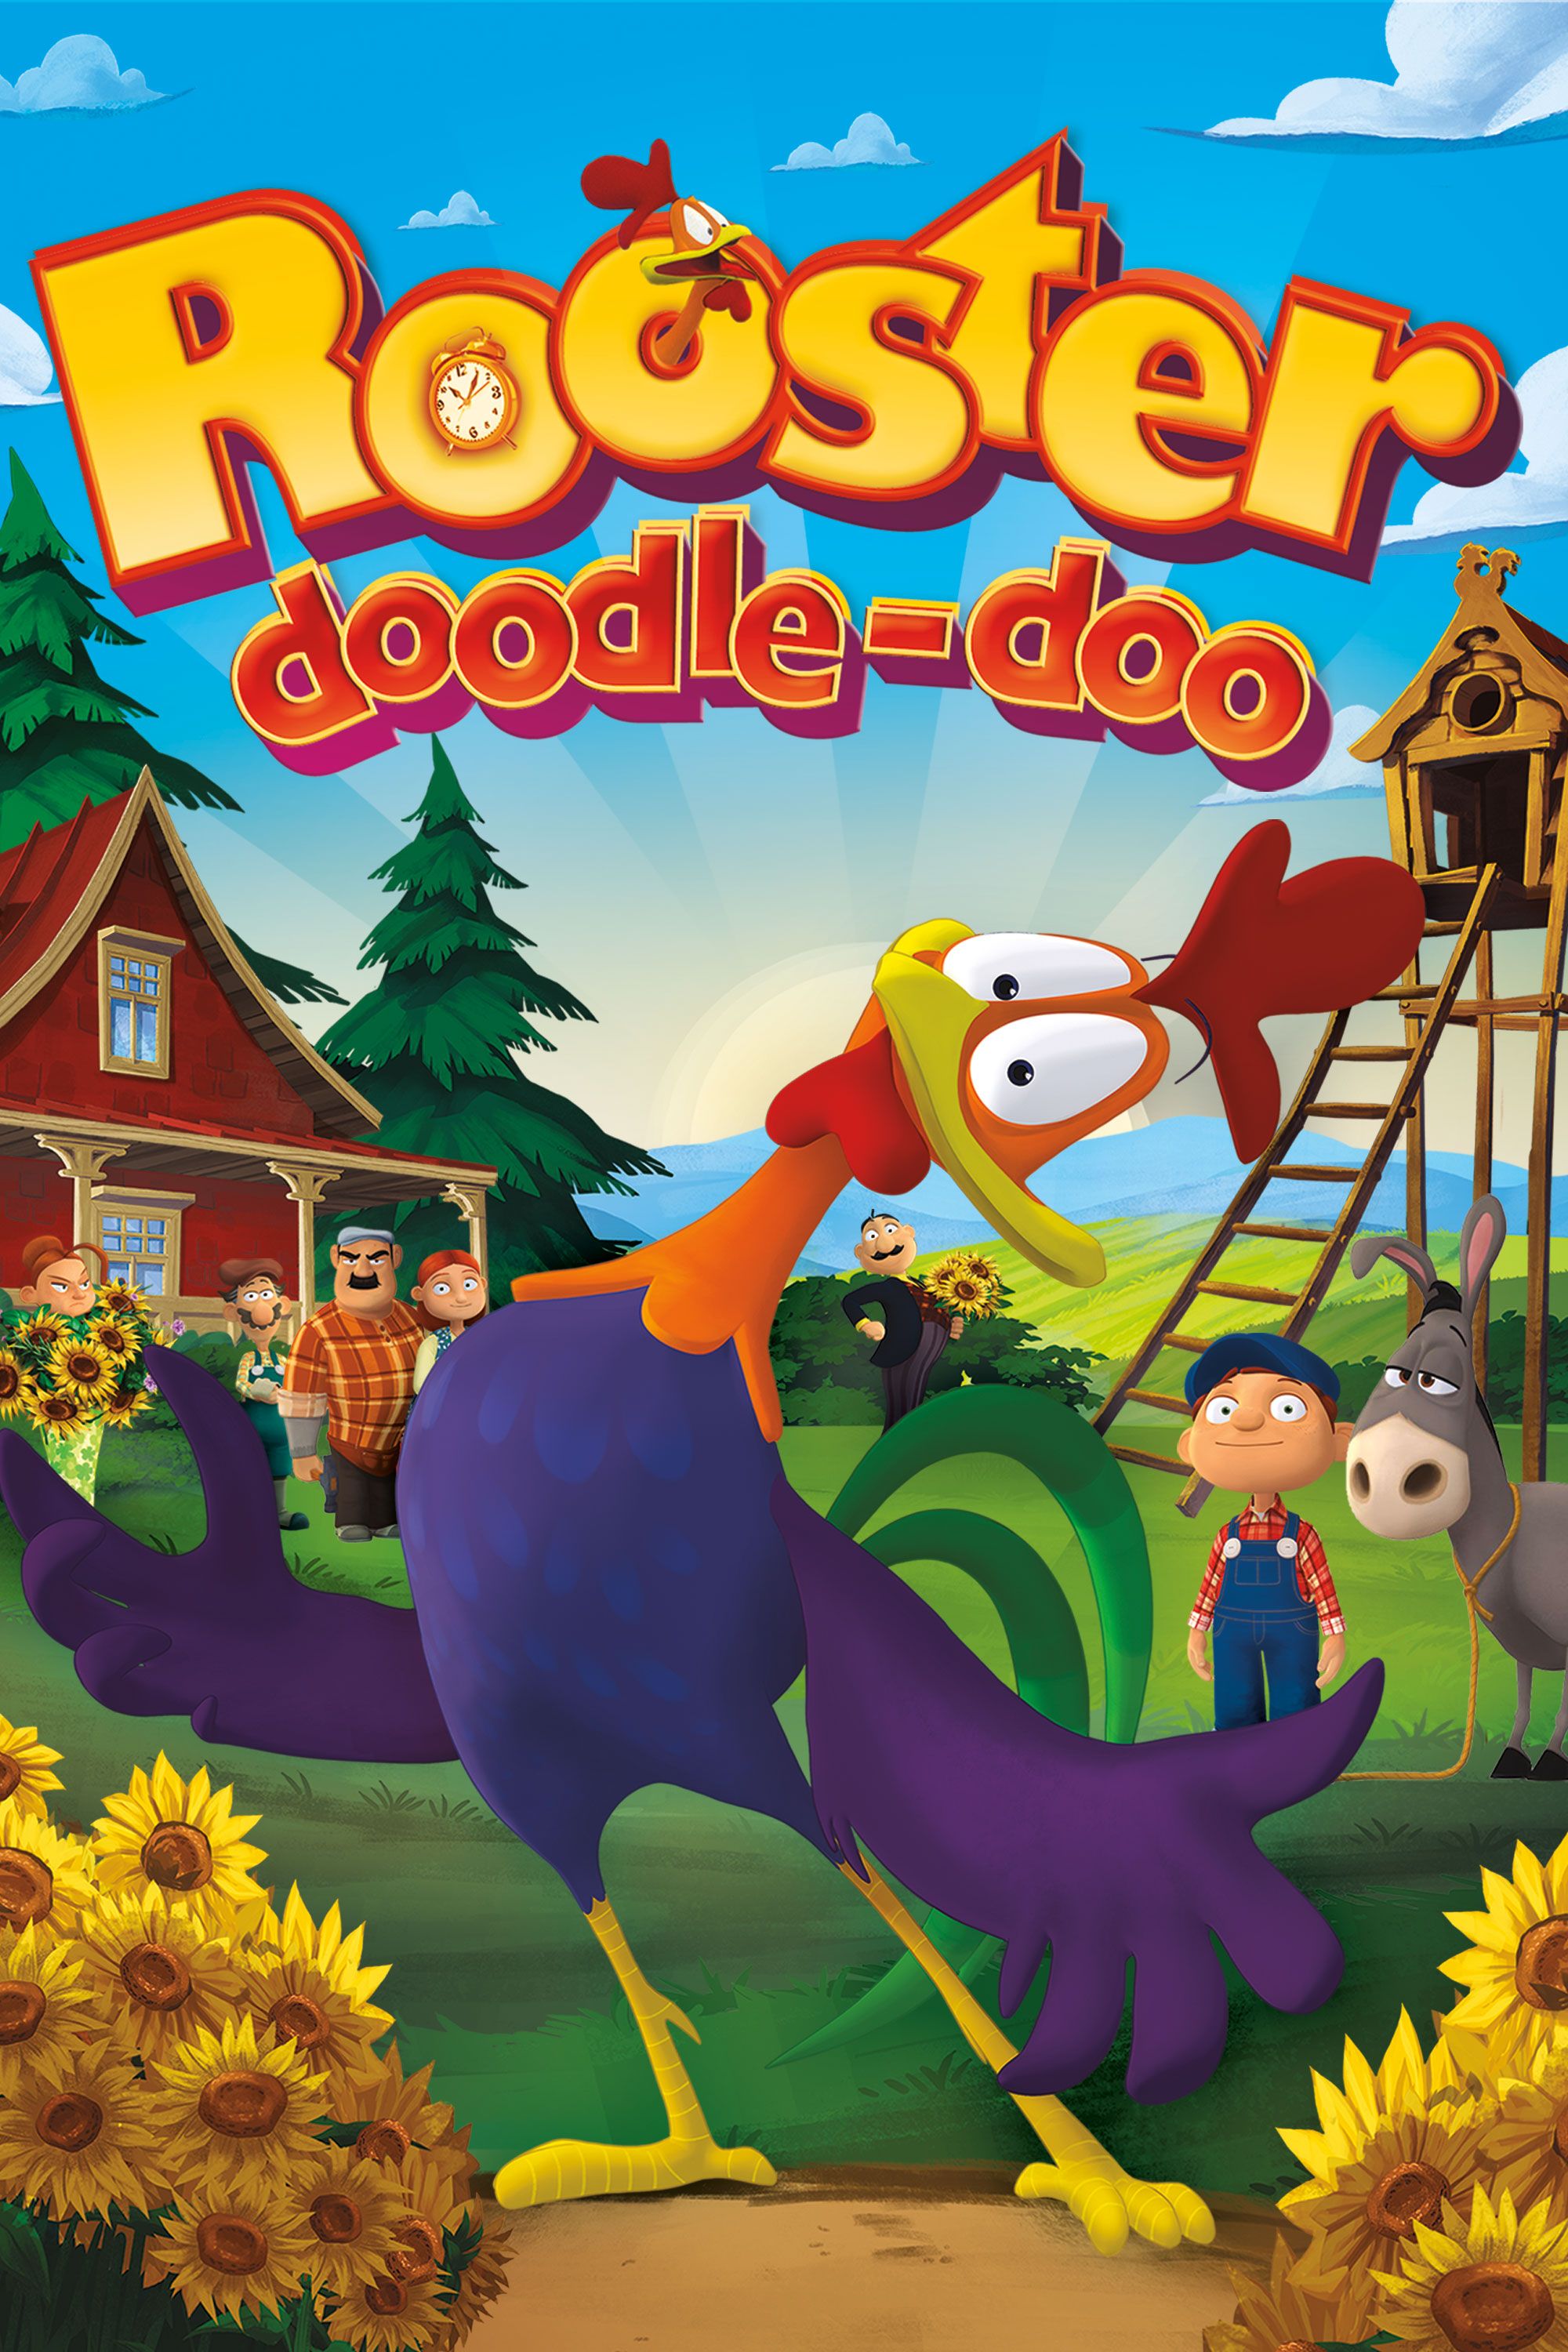 angie stillwell recommends cocka doodle doo movie pic